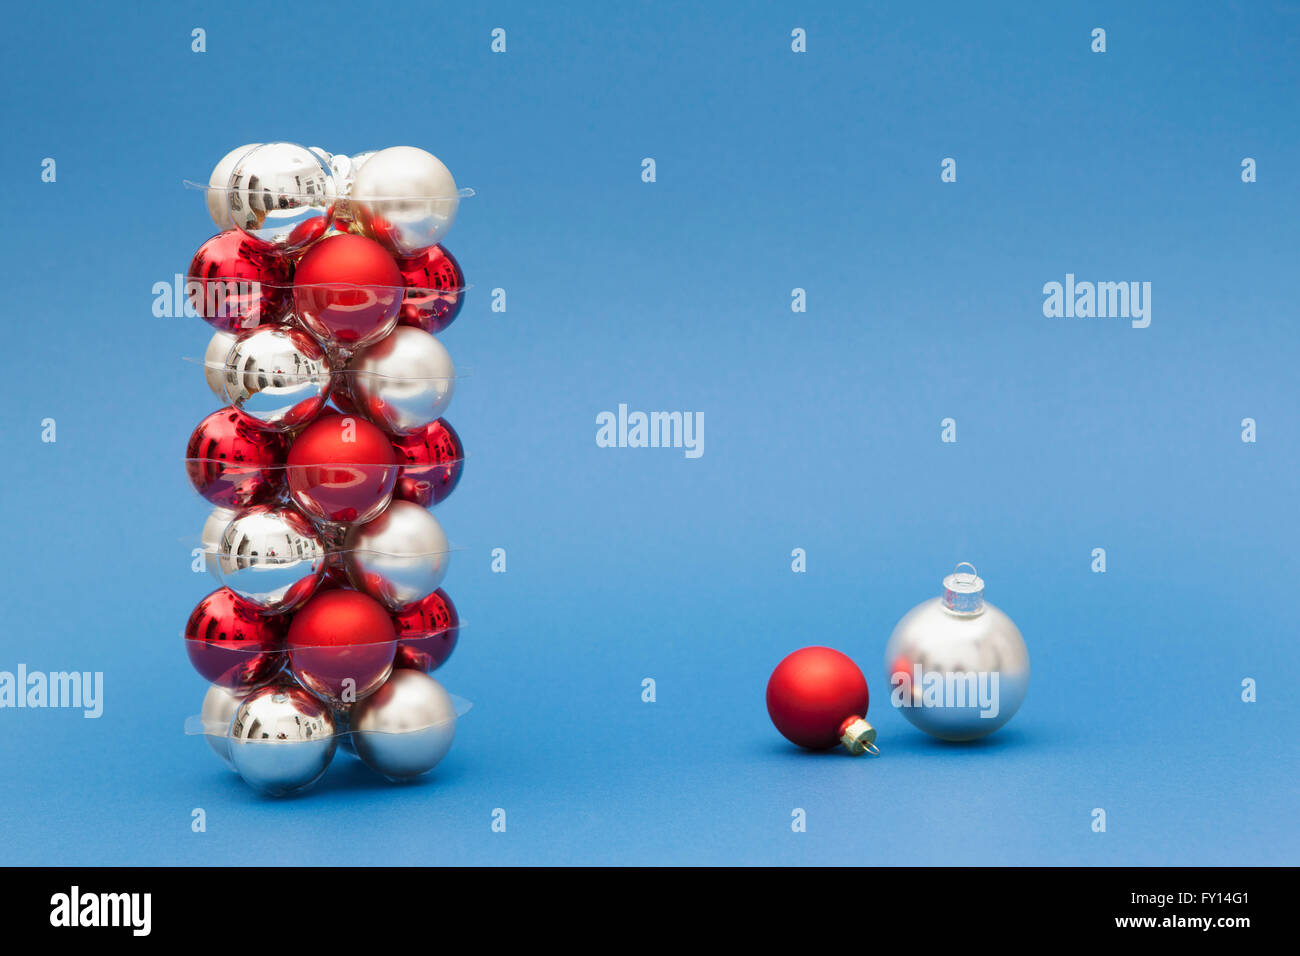 Stack of red and silver colored Christmas ornaments on blue background Stock Photo